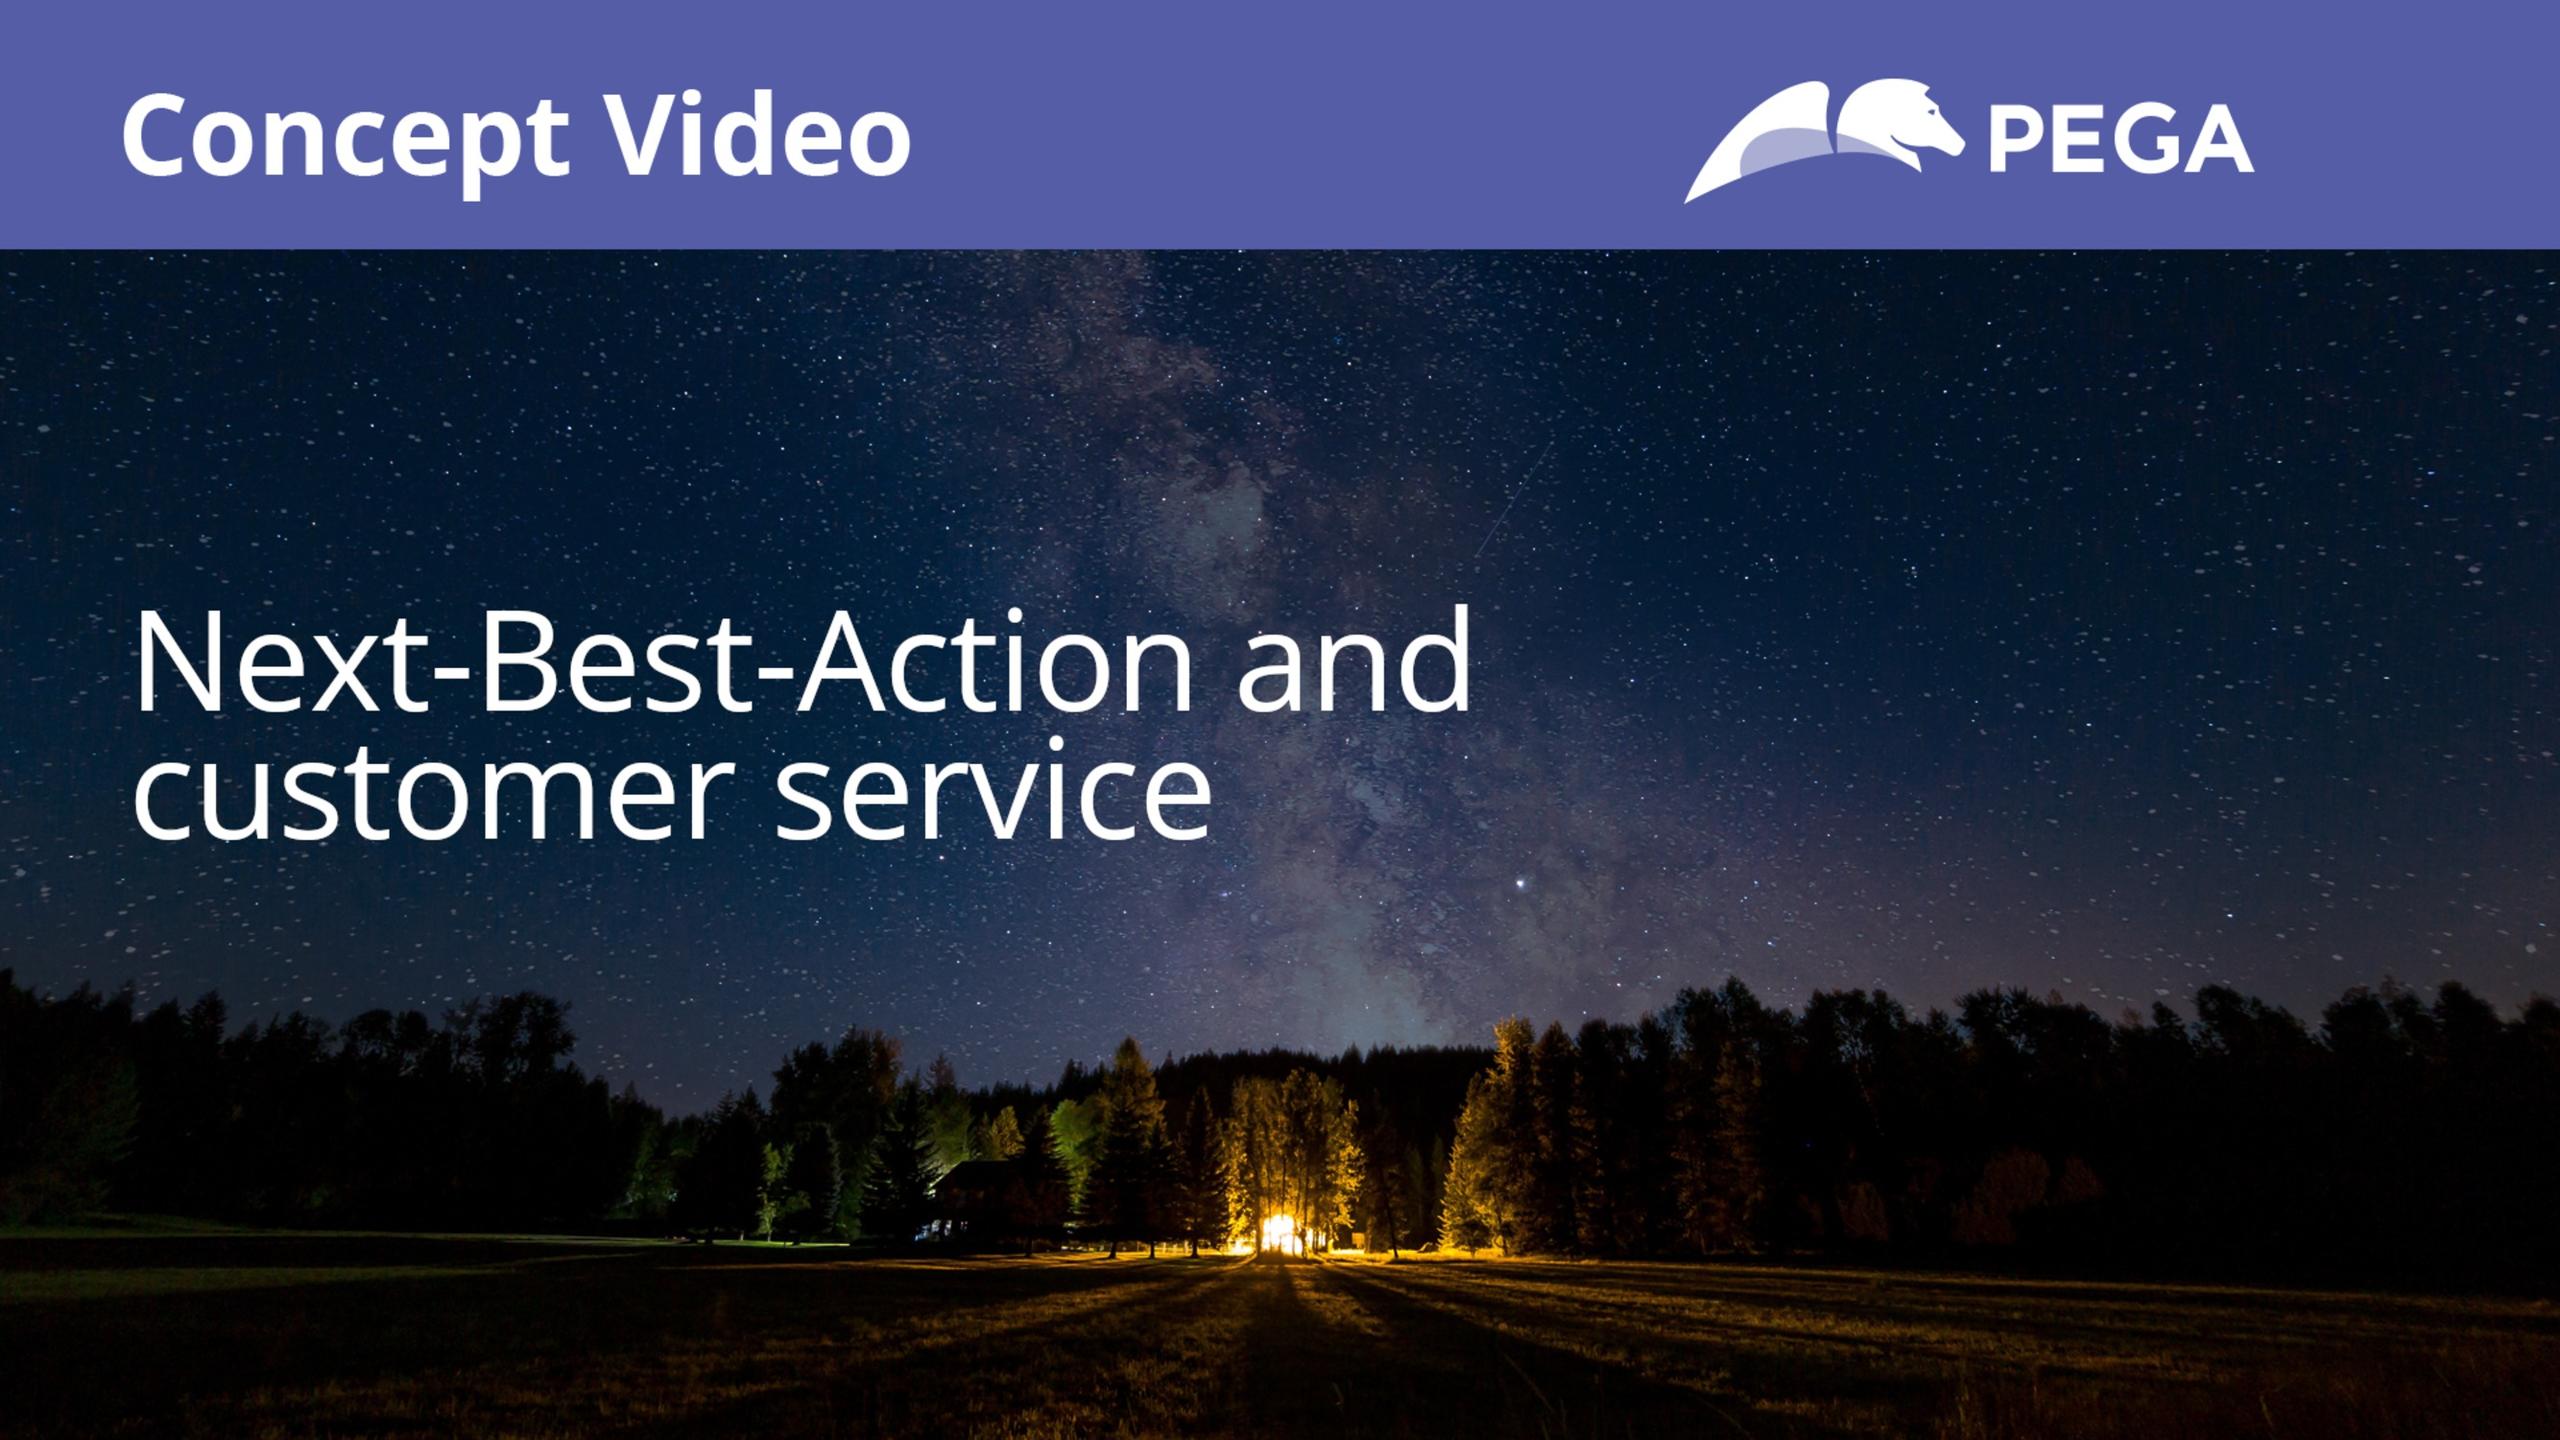 Next-Best-Action and customer service